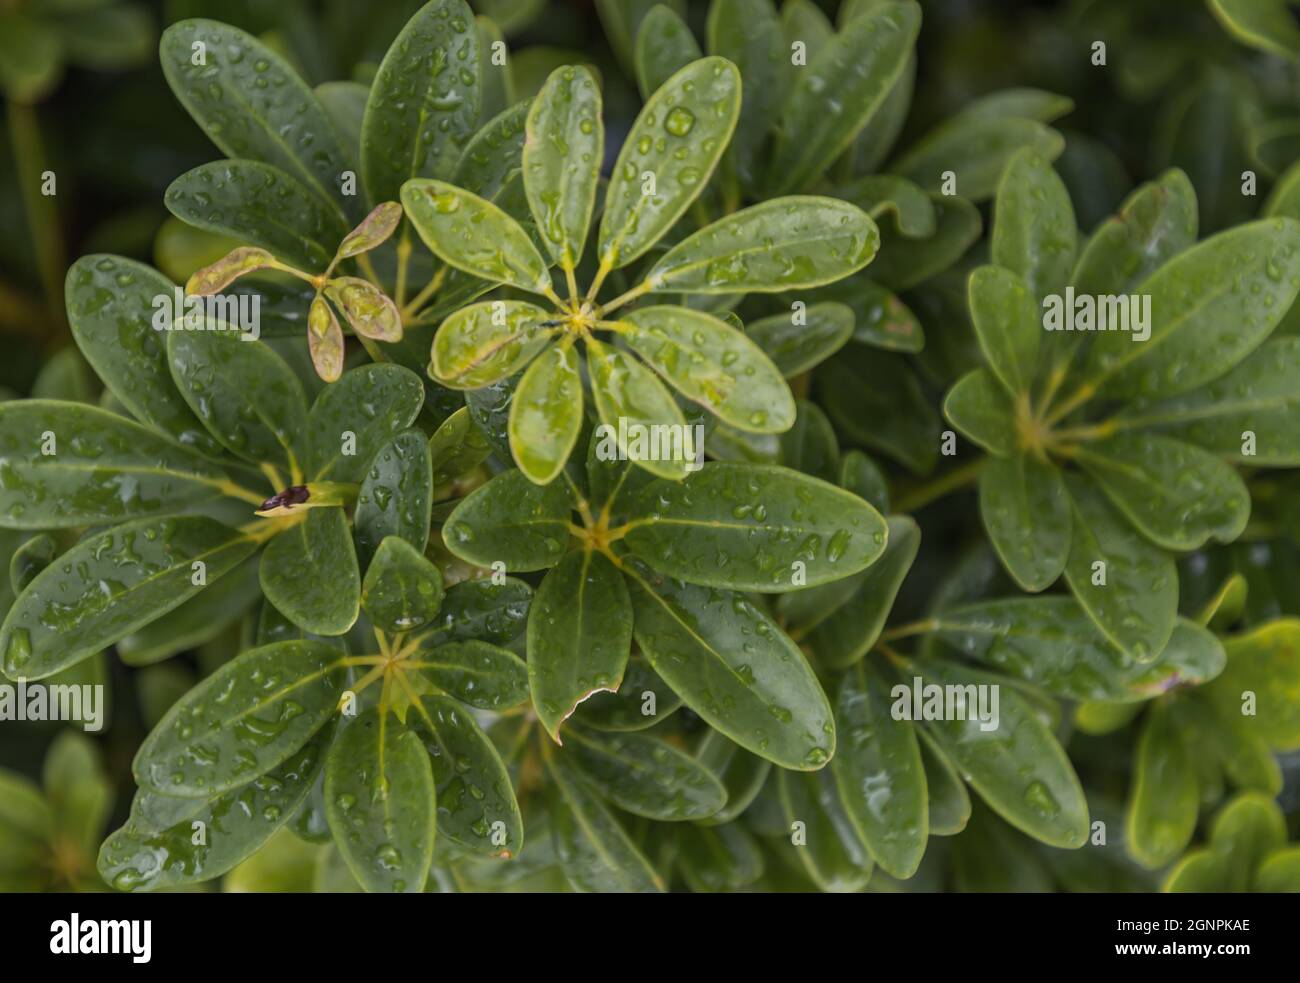 Water drops on Schefflera actinophylla leaves beautifully blooming in garden. Selective focus. Stock Photo